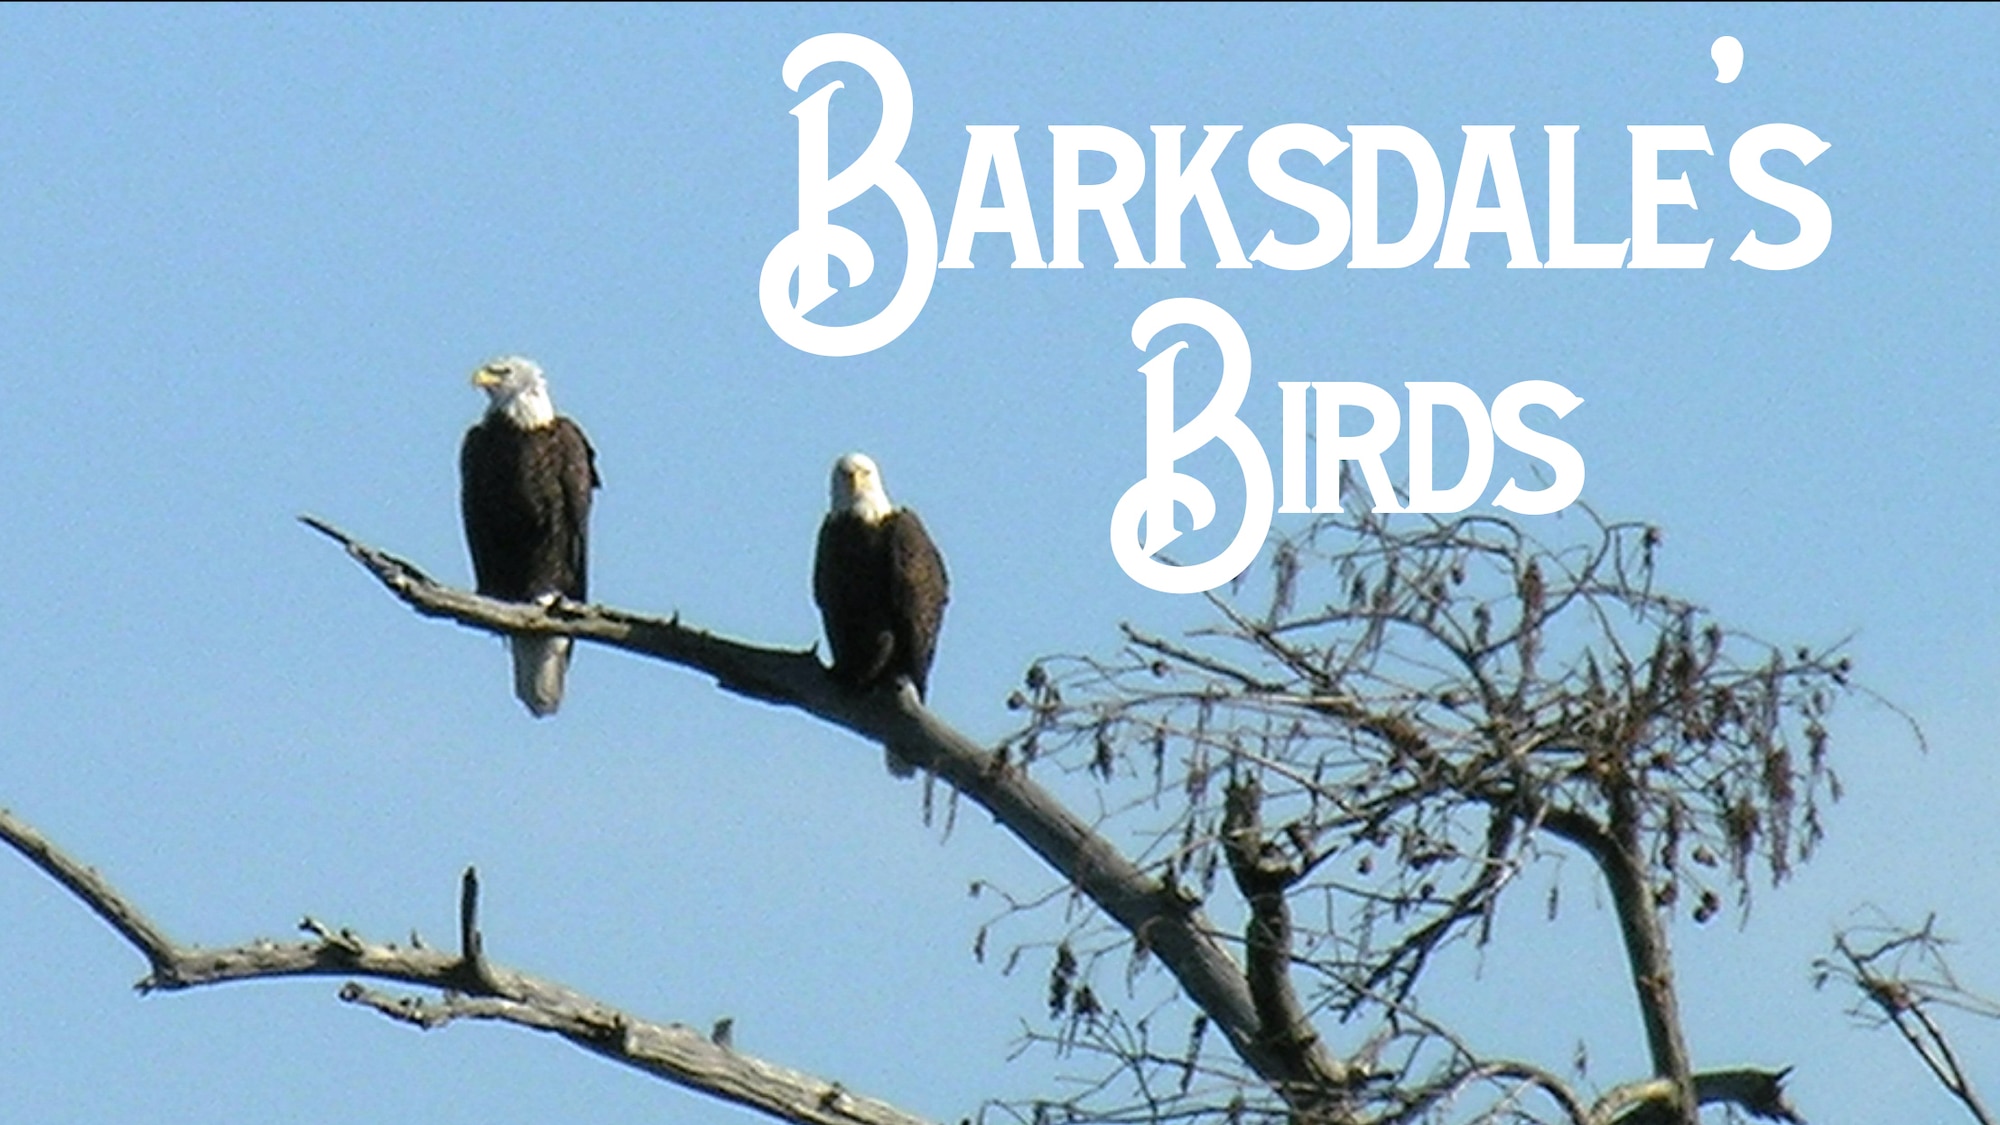 Two bald eagles sit on a tree branch at Barksdale Air Force Base, La. Barksdale receives funding from the Air Force Civil Engineer Center for housing and protecting the nesting and feeding grounds of a group of bald eagles. (Courtesy Photo)